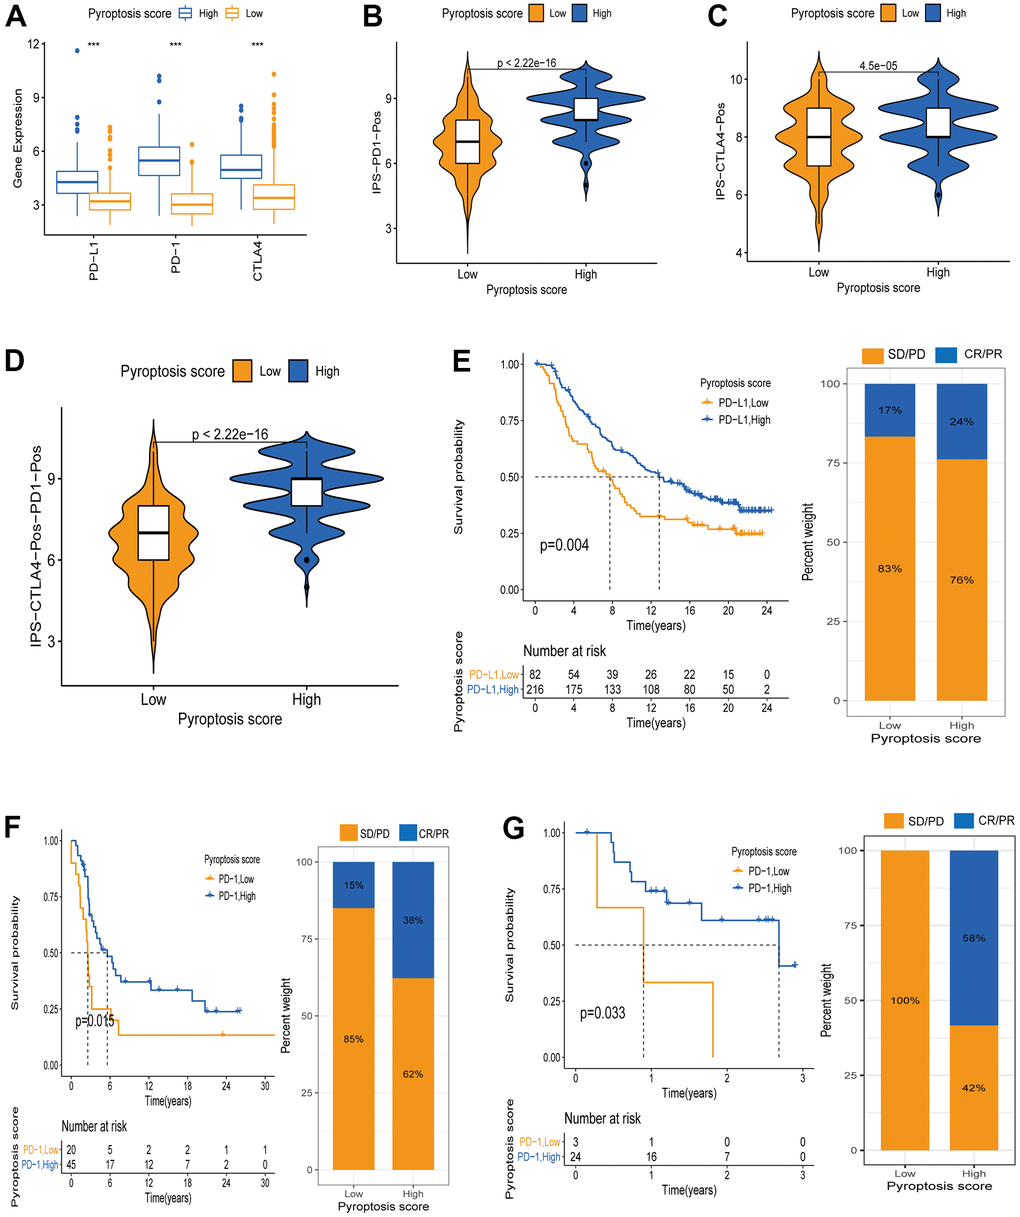 Pyroptosis score predicts immunotherapy benefit in cancer patients. (A) ICB genes expression (PD-L1, PD-1, CTLA4) between high and low pyroptosis score groups. (B–D) Immunophenscore (IPS) between high and low pyroptosis score groups. Blue represents the high-score group and orange the low-score group. The thick line within the violin plot represents the median value. The inner box between the top and bottom represents the interquartile range. (B) IPS score when PD-1 positive; (C) IPS score when CTLA4 positive; (D) IPS score when both PD-1 and CTLA4 positives. (E) Kaplan-Meier curves for survival analysis between high (n = 216) and low (n = 82) pyroptosis score groups in the IMvigor210 cohort receiving anti-PD-L1 therapy. Proportion of patients responding to immunotherapy between high and low pyroptosis score groups (SD/PD: stable disease/progressive disease; CR/PR: complete response /partial response. Response/Non-response: 17%/83% in low pyroptosis score; Response/Non-response: 24%/76% in high pyroptosis score). (F) Kaplan-Meier curves for survival analysis between high (n = 45) and low (n = 20) pyroptosis scores in the GSE93157 cohort receiving anti-PD-1 therapy (Response/Non-response: 15%/85% in low pyroptosis score; Response/Non-response: 38%/62% in high pyroptosis score). (G) Survival curves between the groups with high pyroptosis score (n = 24) and low (n = 3) pyroptosis score in the GSE78220 cohort receiving anti-PD-1 therapy (Response/Non-response: 0/100% in low pyroptosis score; Response/Non-response: 58%/42% in high pyroptosis score).